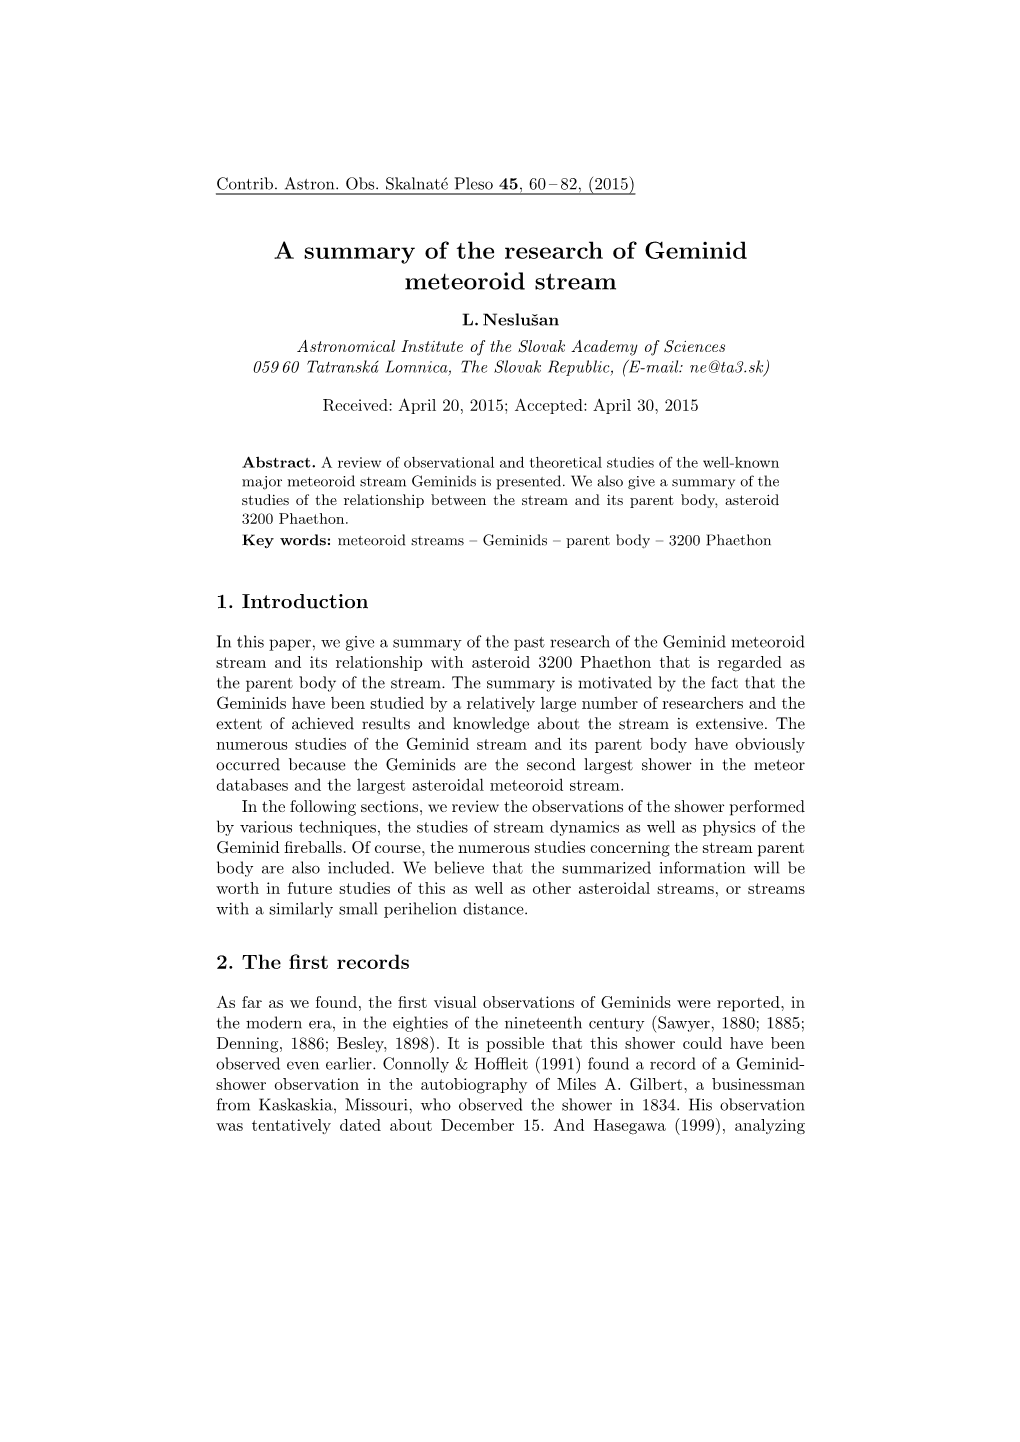 A Summary of the Research of Geminid Meteoroid Stream